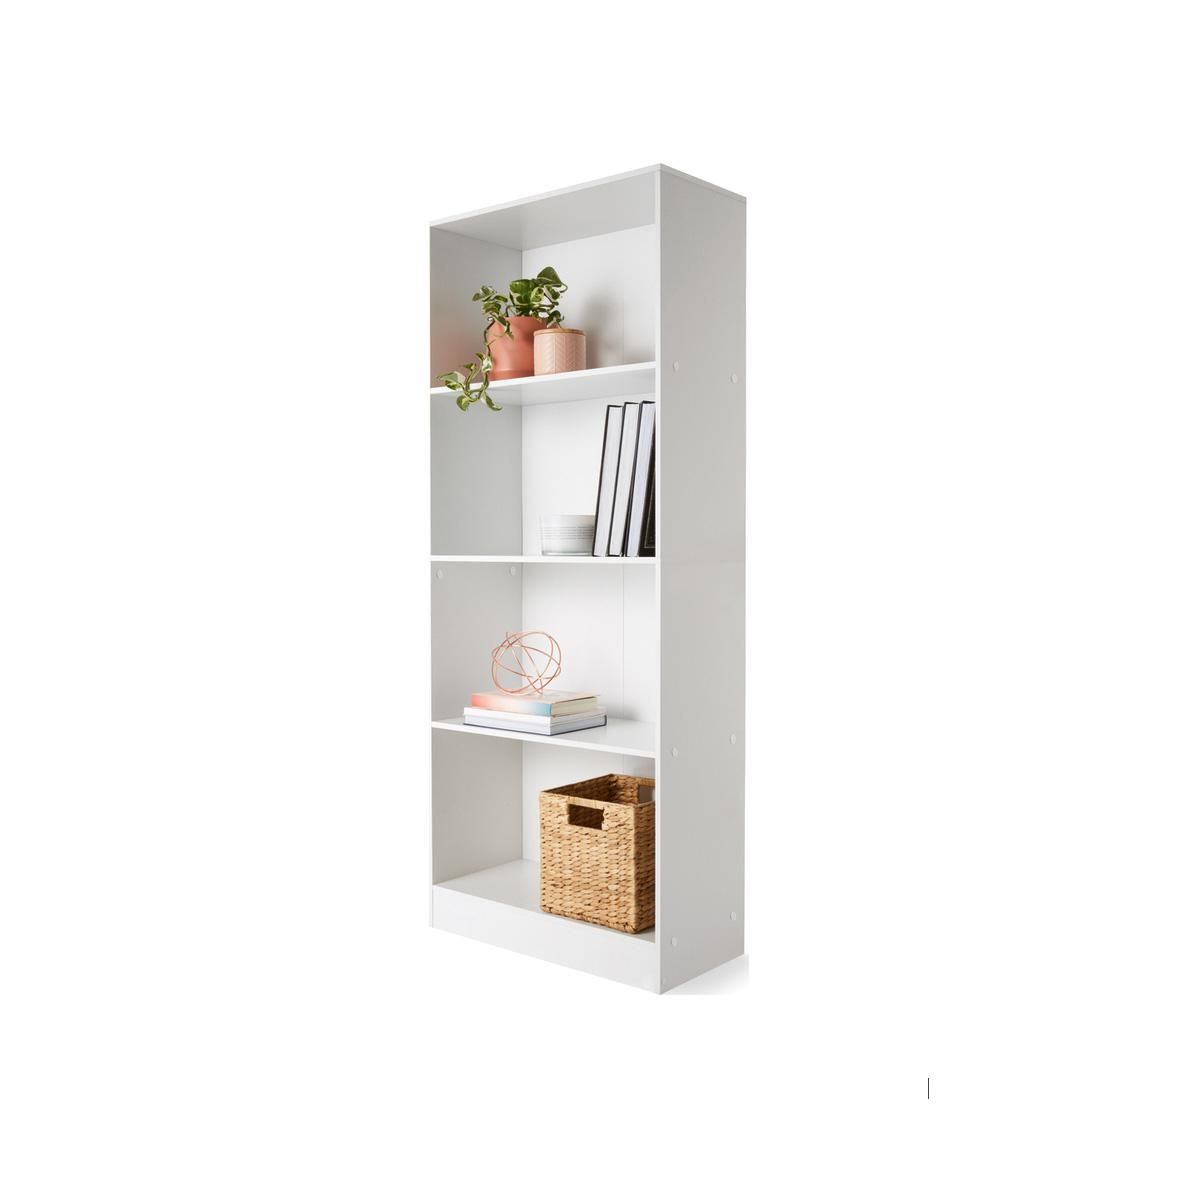 4 Tier Bookshelf White – Kmart For Four Tier Bookcases (View 8 of 15)